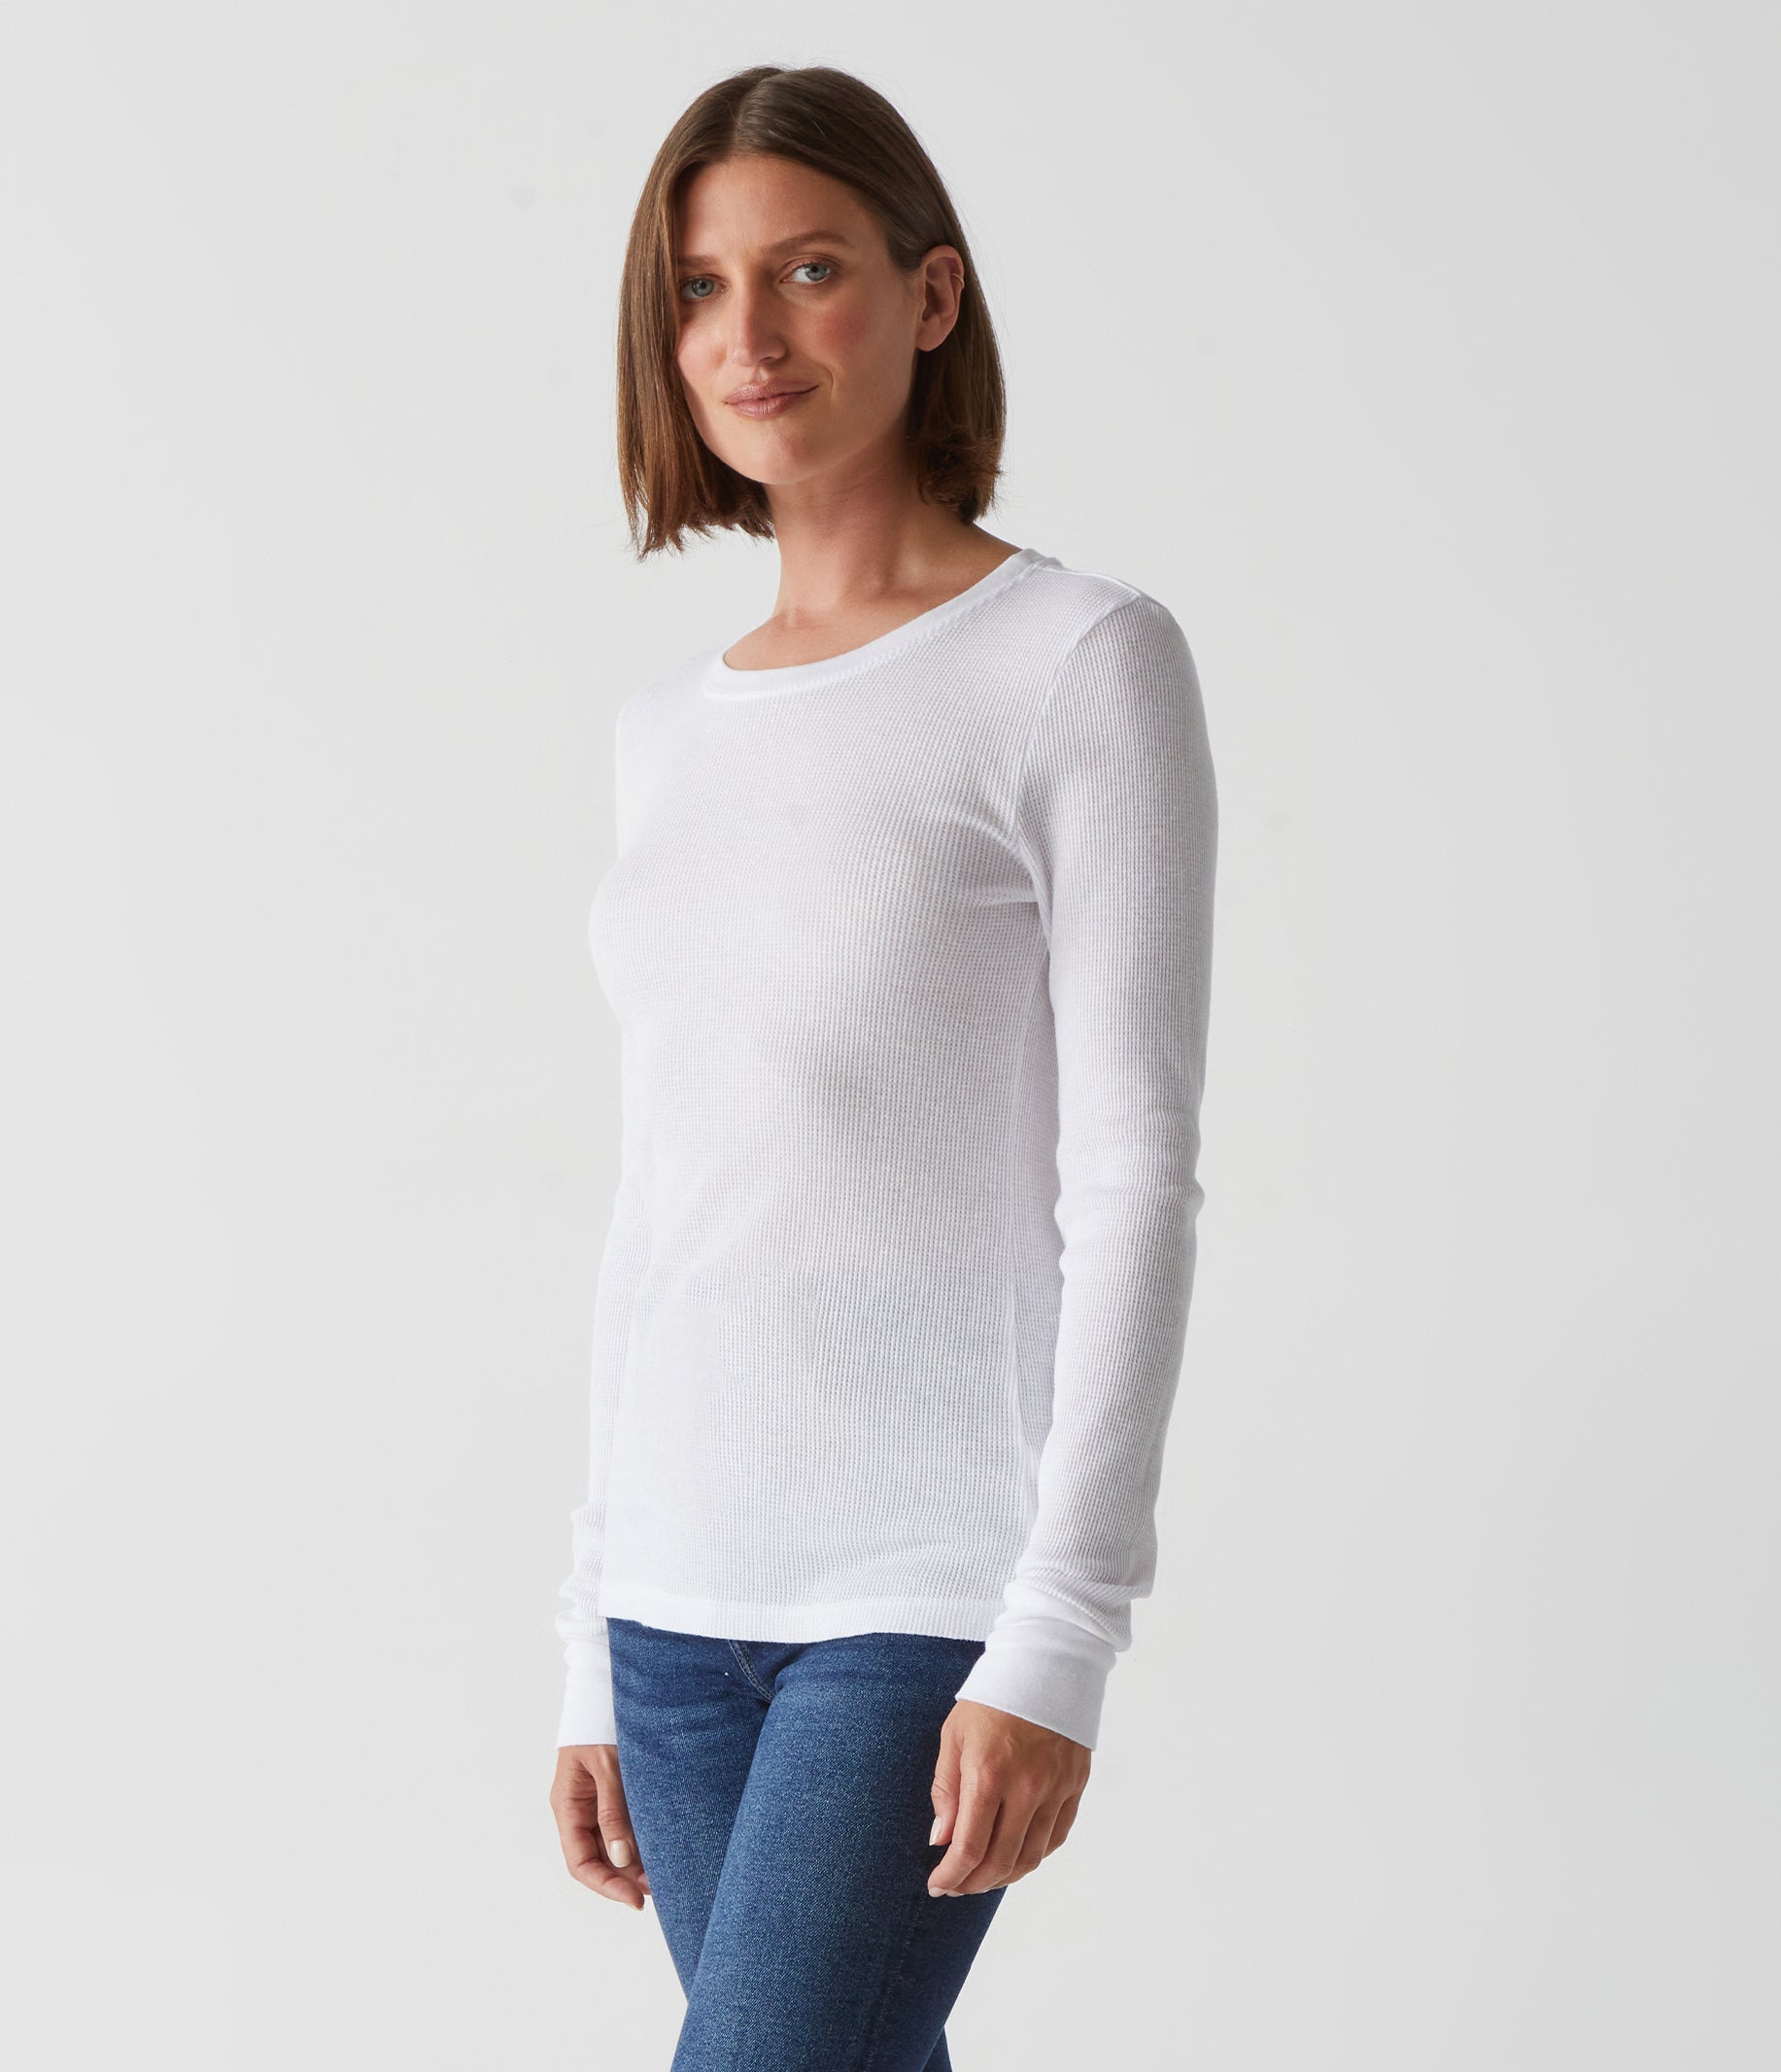 Thermal Crew Neck Long Sleeved Top - White